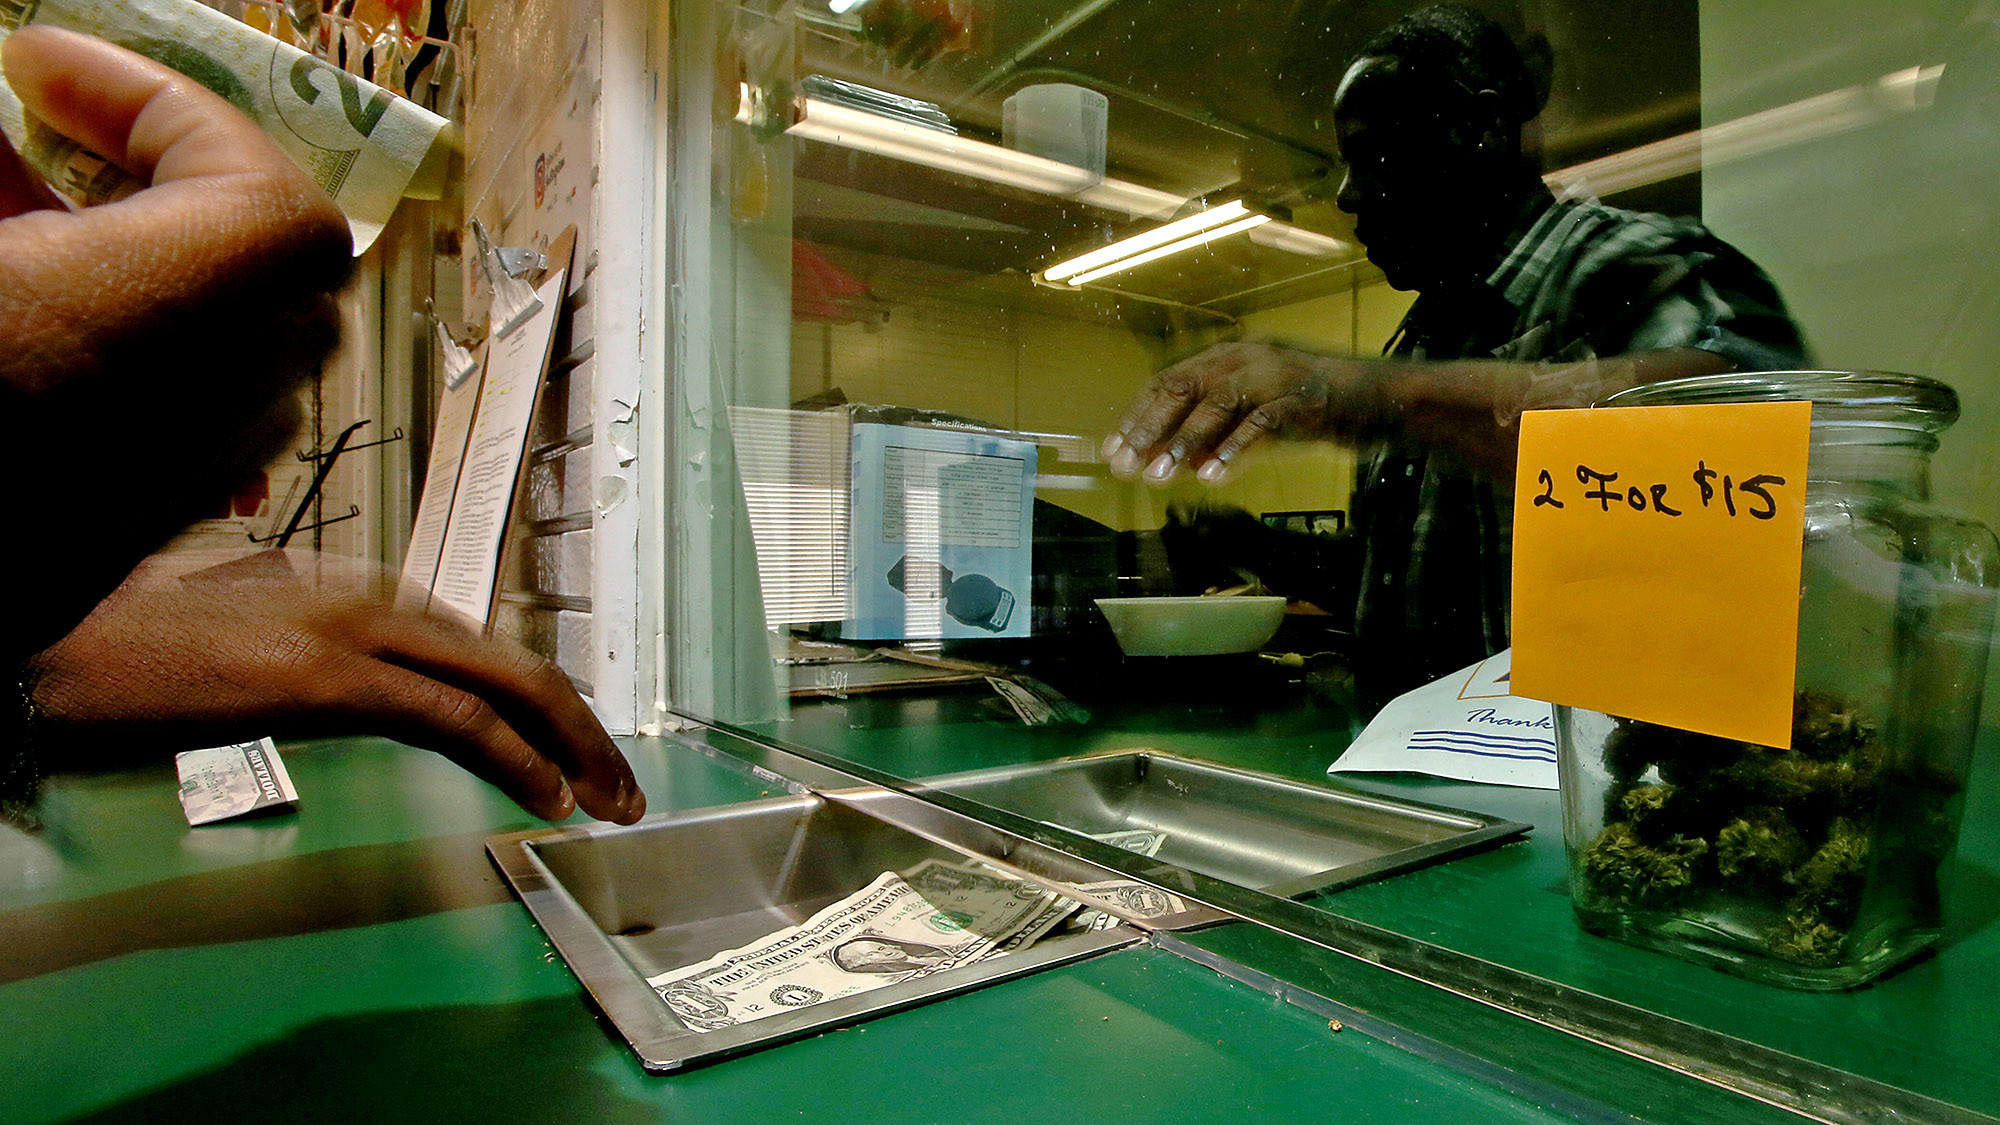 A medical marijuana patient pays for a purchase through a teller window at Medex, a dispensary on Century Boulevard in South Los Angeles.